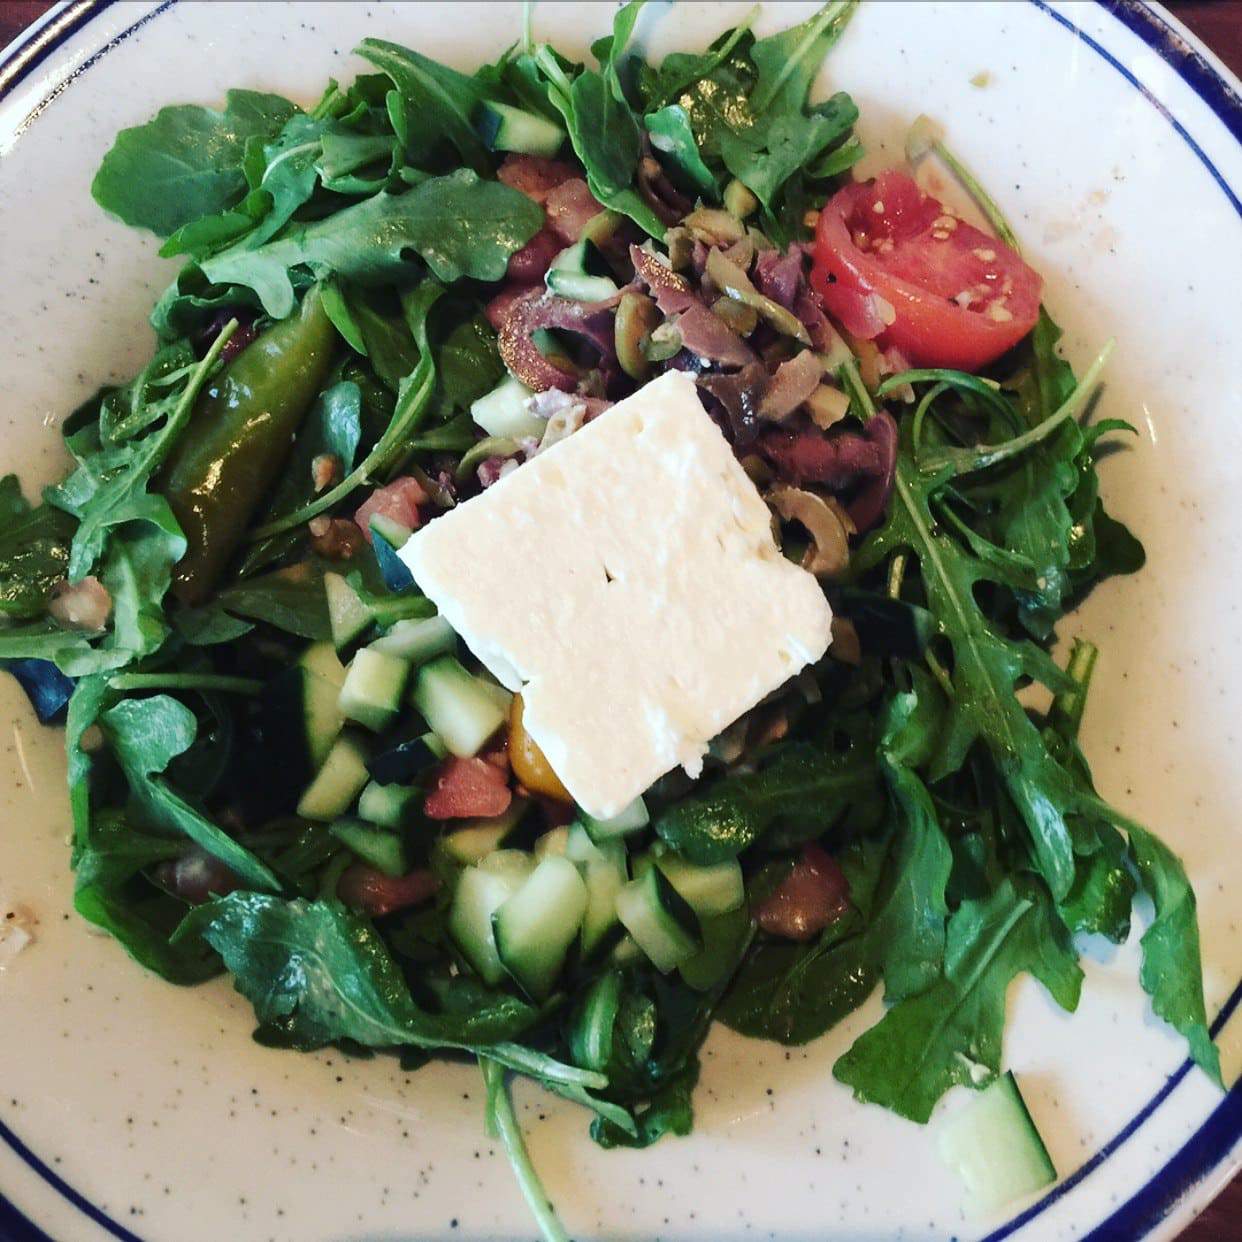 The Enos Greek salad from Eno's Pizza Tavern. Photo by Kelsey Corban.